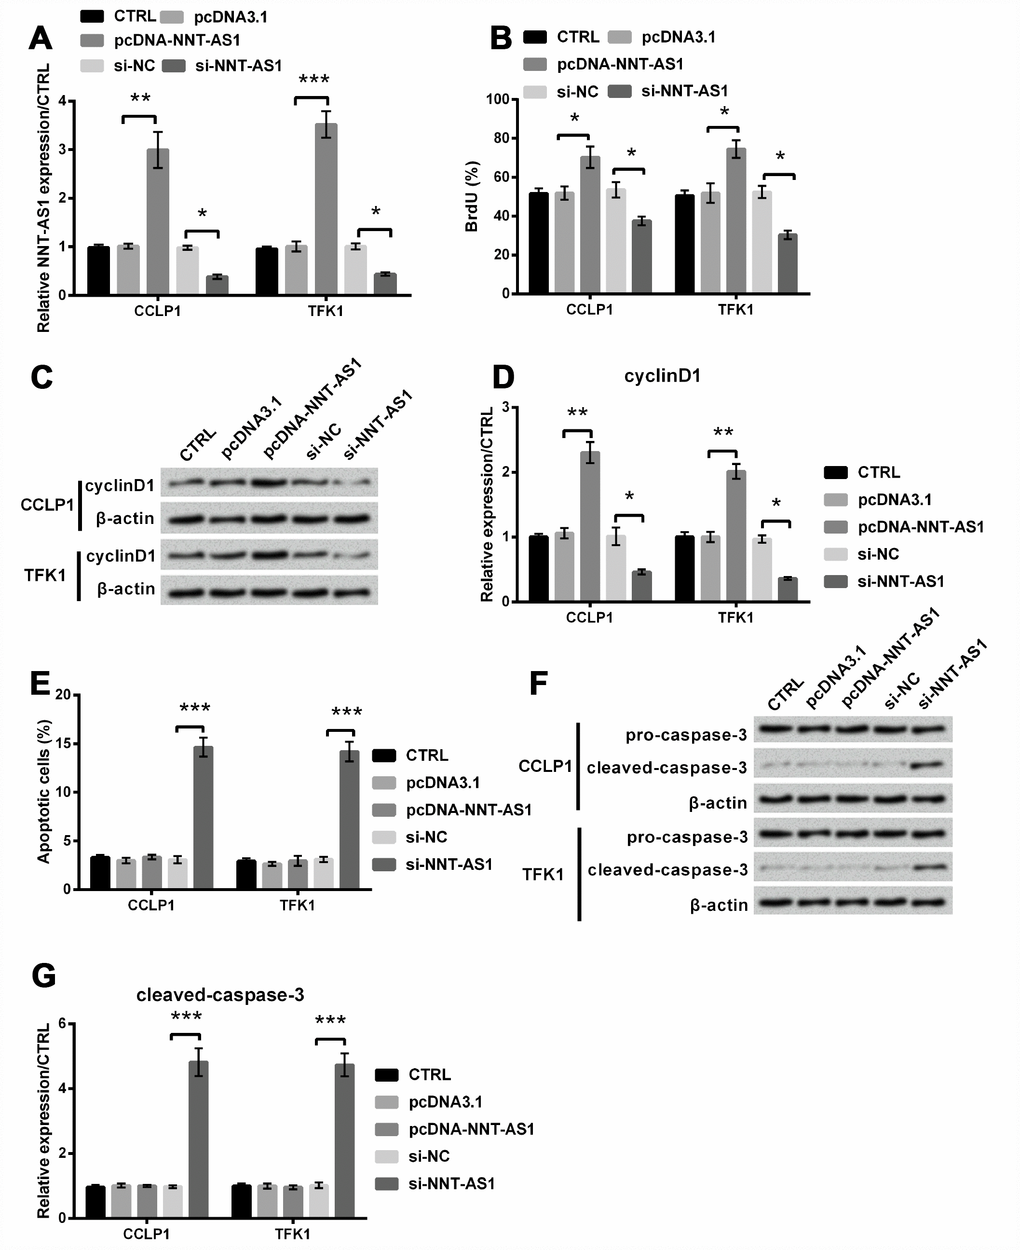 Effects of NNT-AS1 on the growth of CCLP1 and TFK1 cells, which were transfected with pcDNA-NNT-AS1 and si-NNT-AS1. (A) NNT-AS1 level was examined via qRT-PCR. (B) Proliferation was examined via BrdU. Expression of cyclinD1 was examined via western blot (C) and analyzed quantitatively (D) in both cells. (E) Apoptosis was examined via flow cytometry. Expression of cleaved-caspase-3 was examined via western blot (F) and analyzed quantitatively (G) in both cells. * P P P 